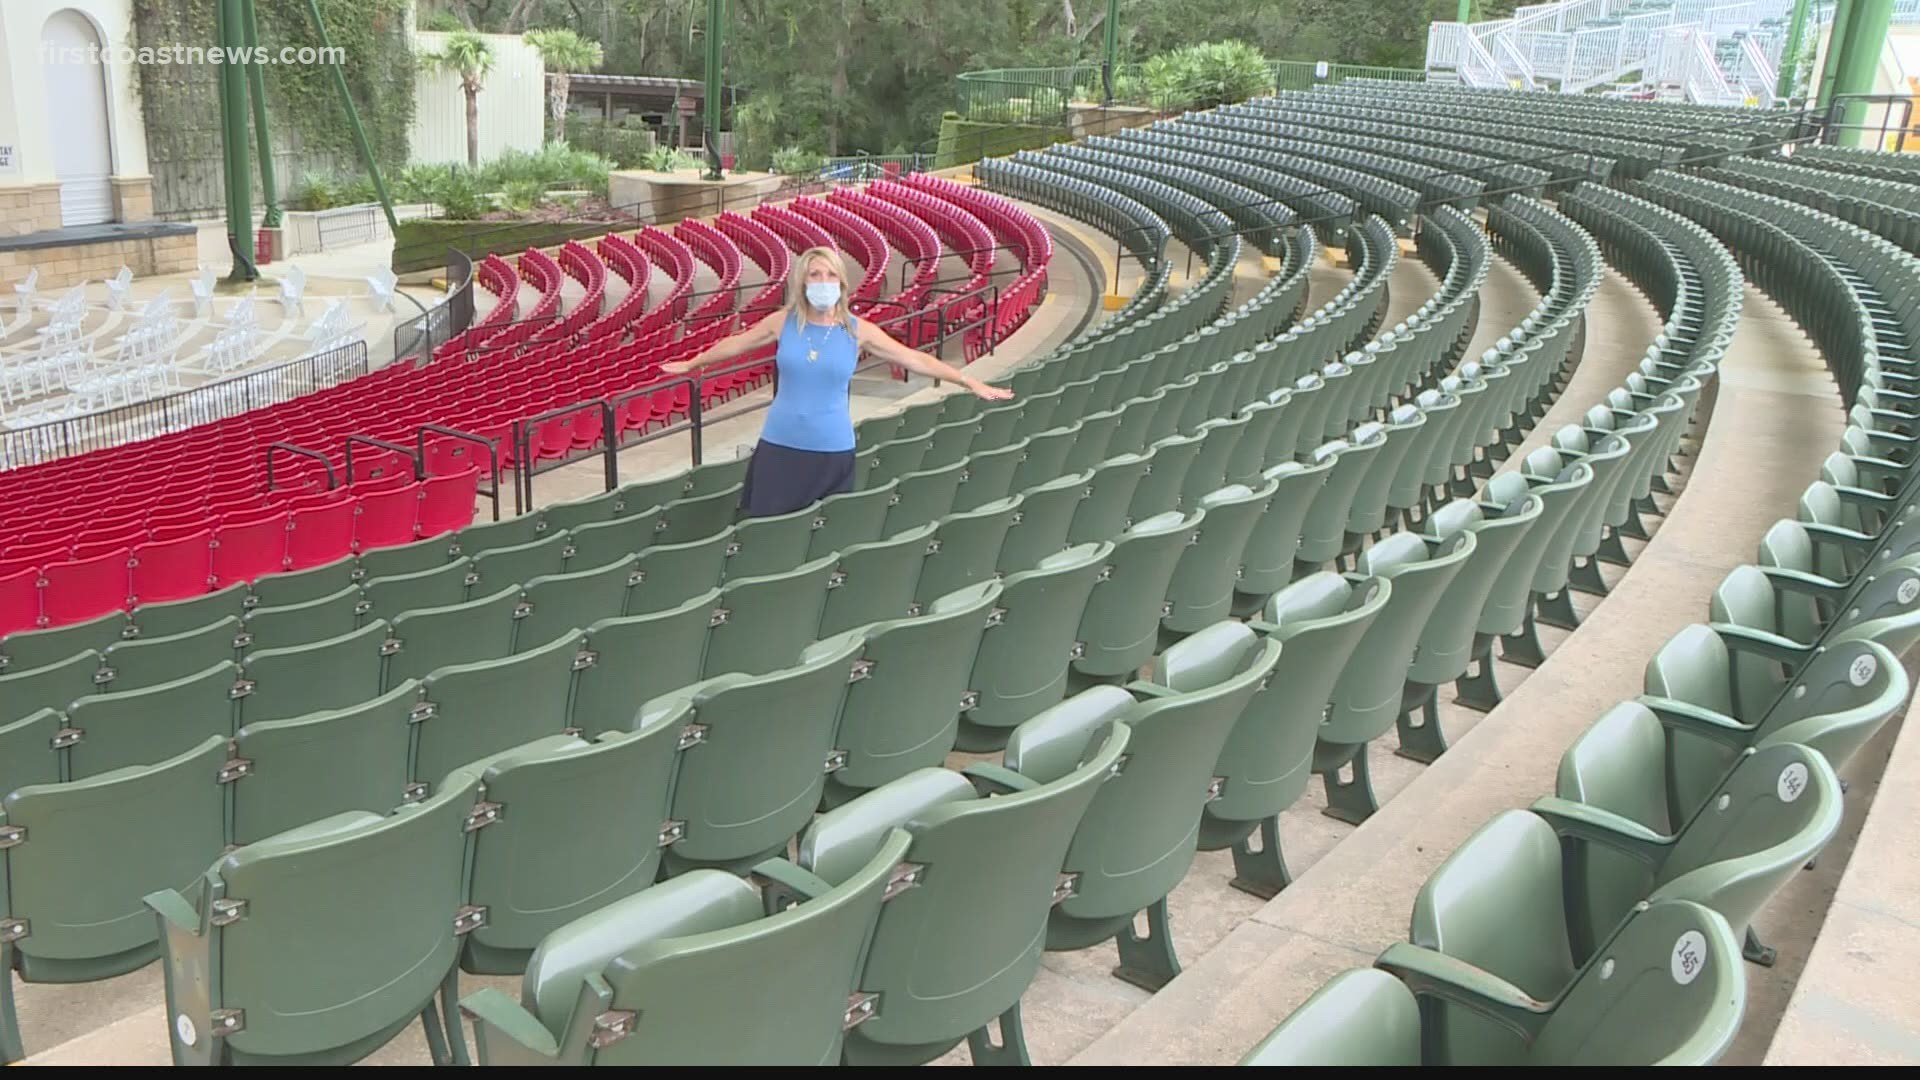 St Augustine Amphitheatre To Reopen